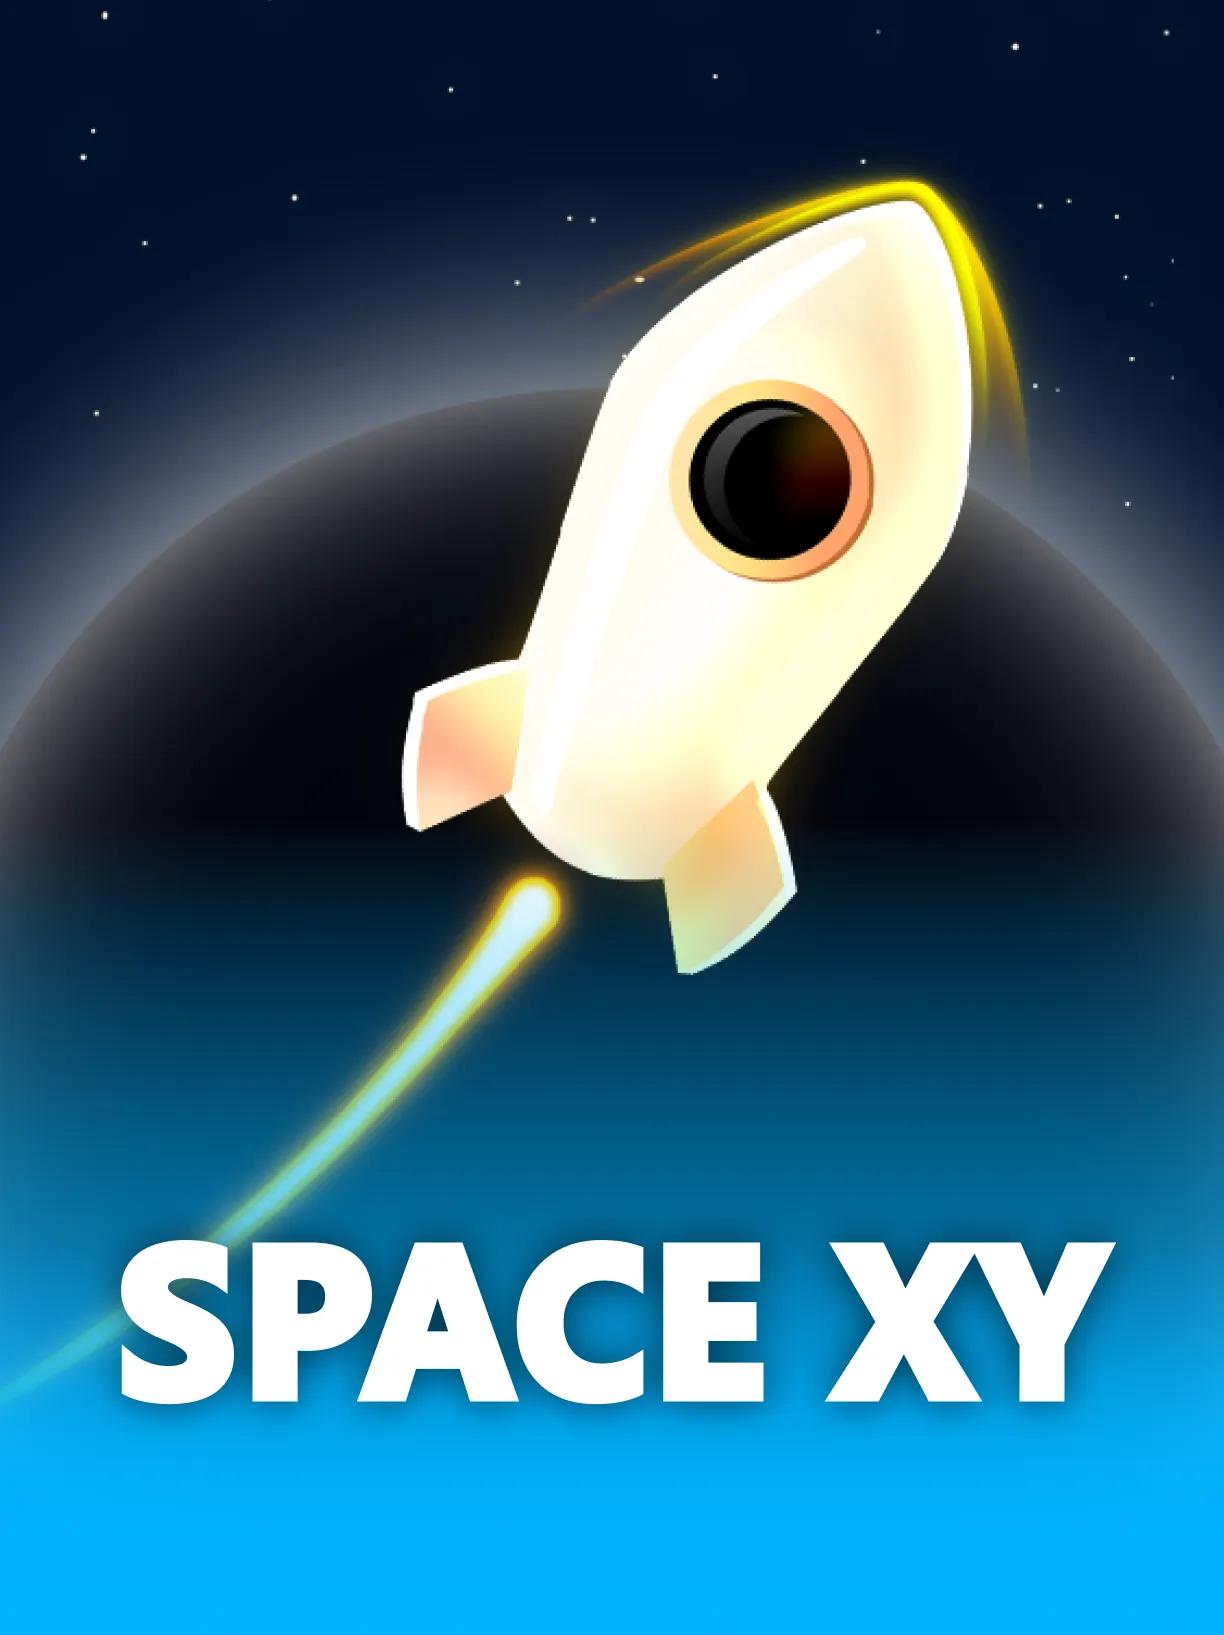 Space_XY_square.webp